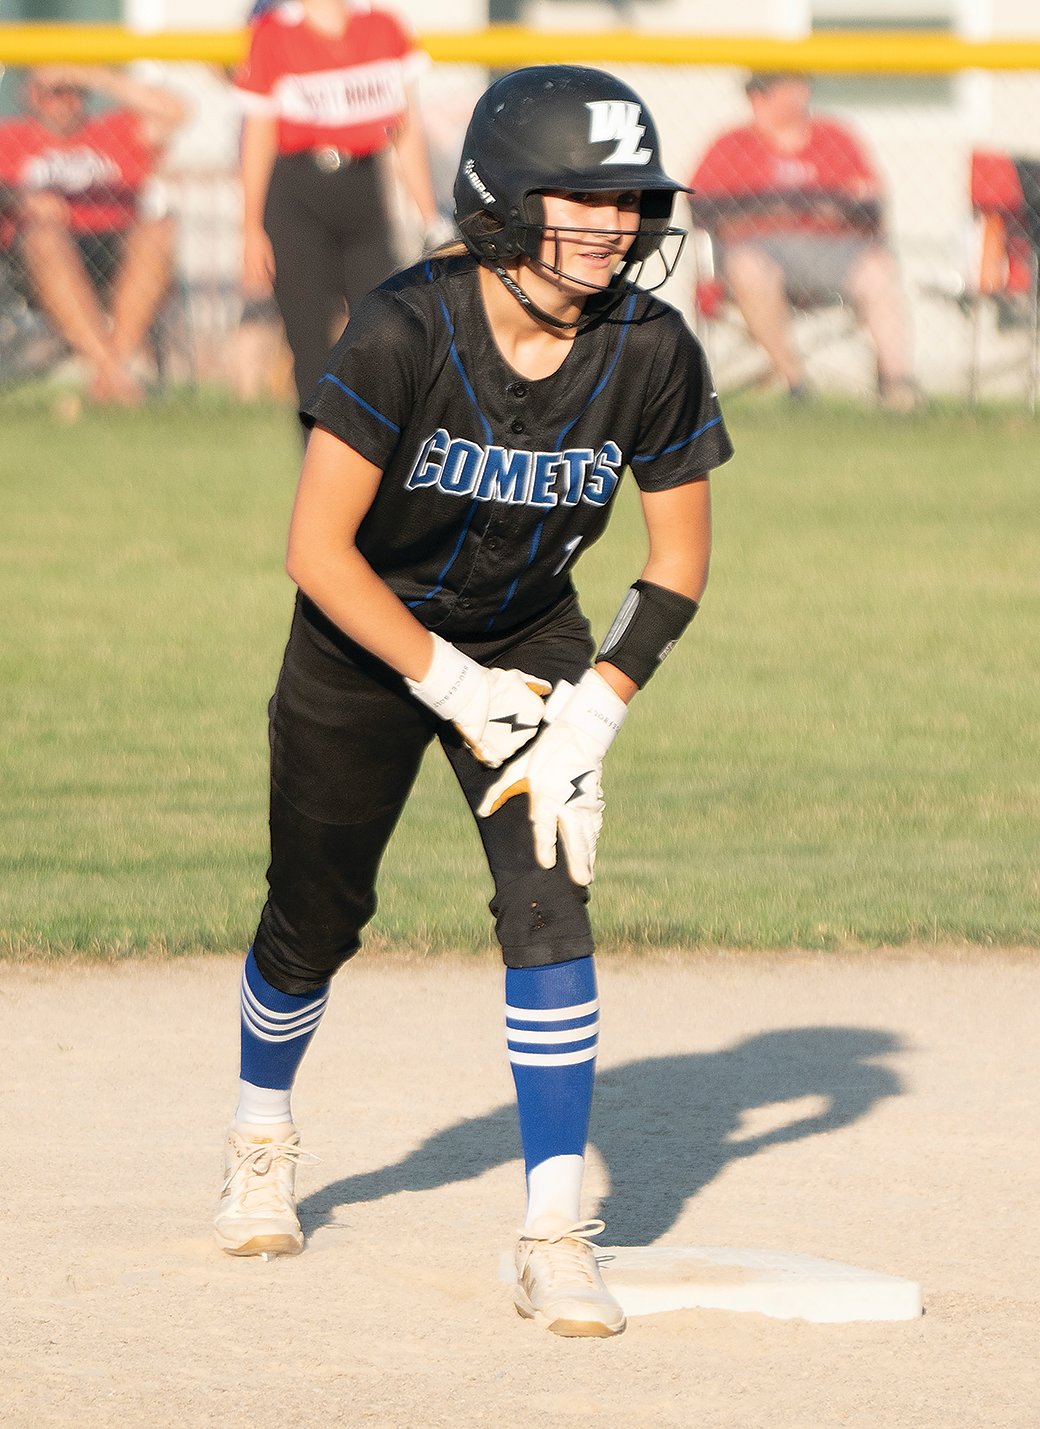 Kiley Collins stands on second base waiting for her teammate to hit the ball.